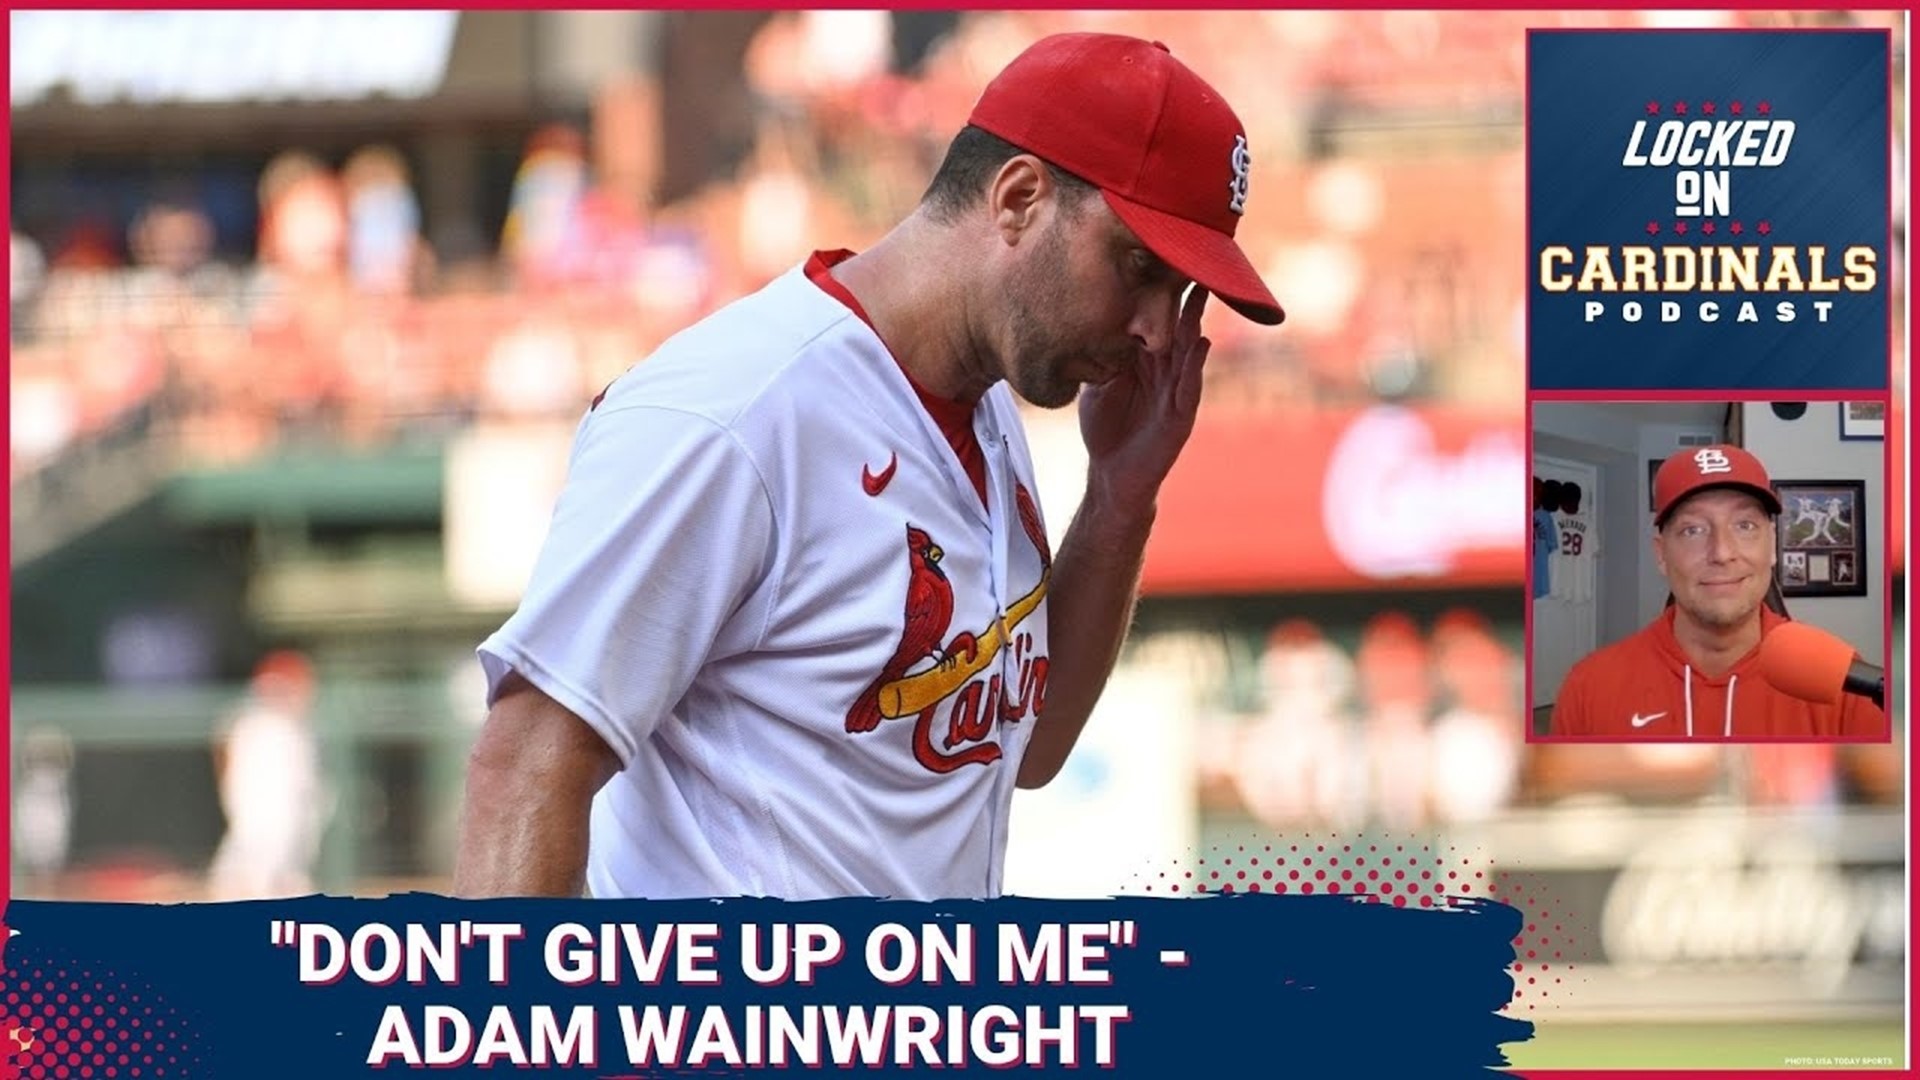 An Emotional Discussion About The Future Of Adam Wainwright, Yankees In Town, All Star Game